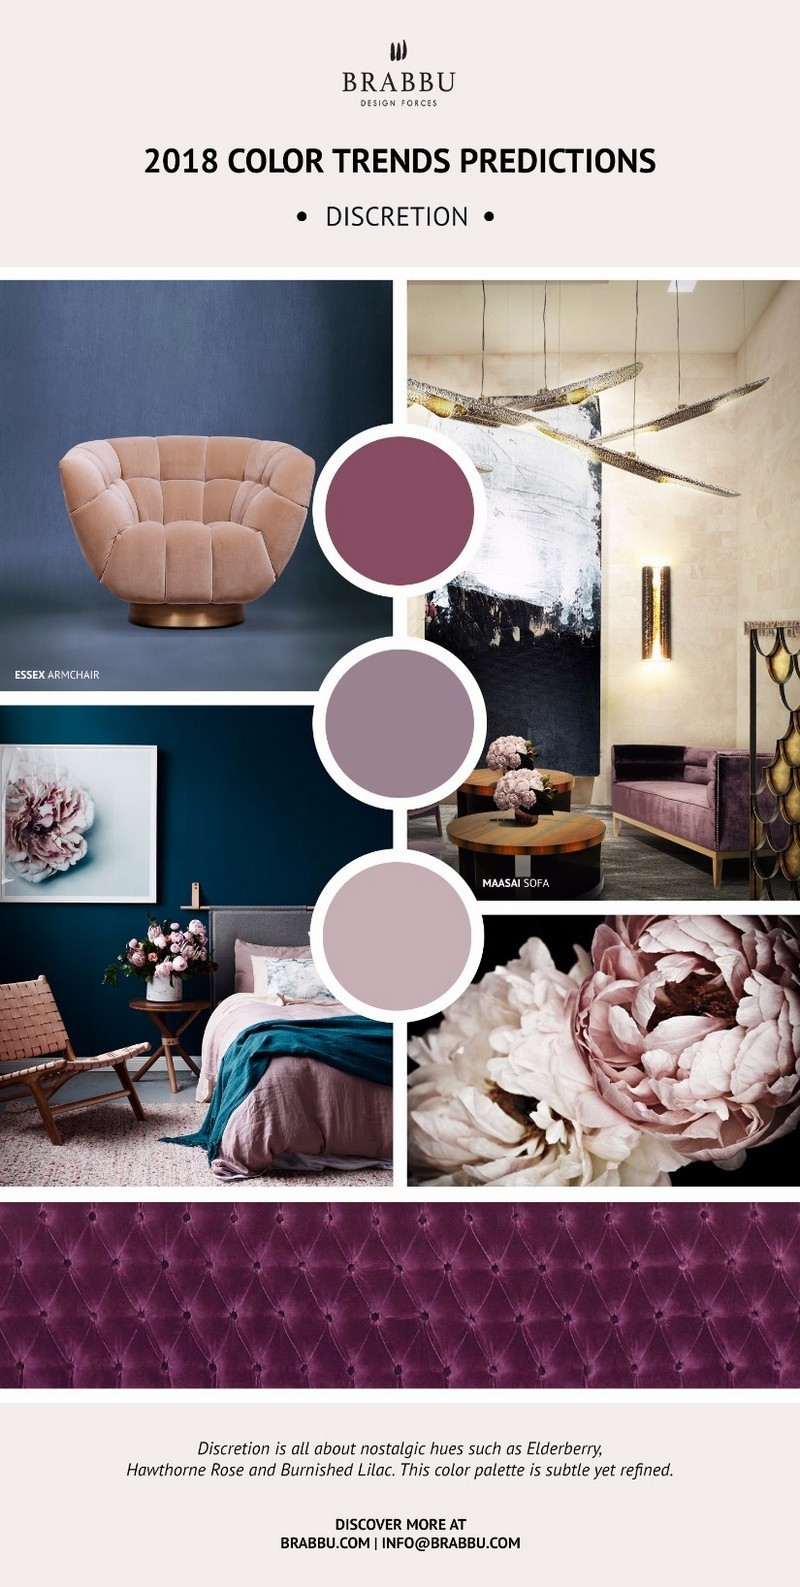 Awesome Mood Boards Following Pantone 2018 Color Trends - Pantone Mood Boards - Pantone Color of the Year 2018 - Trend Forecasting - Design Build Ideas